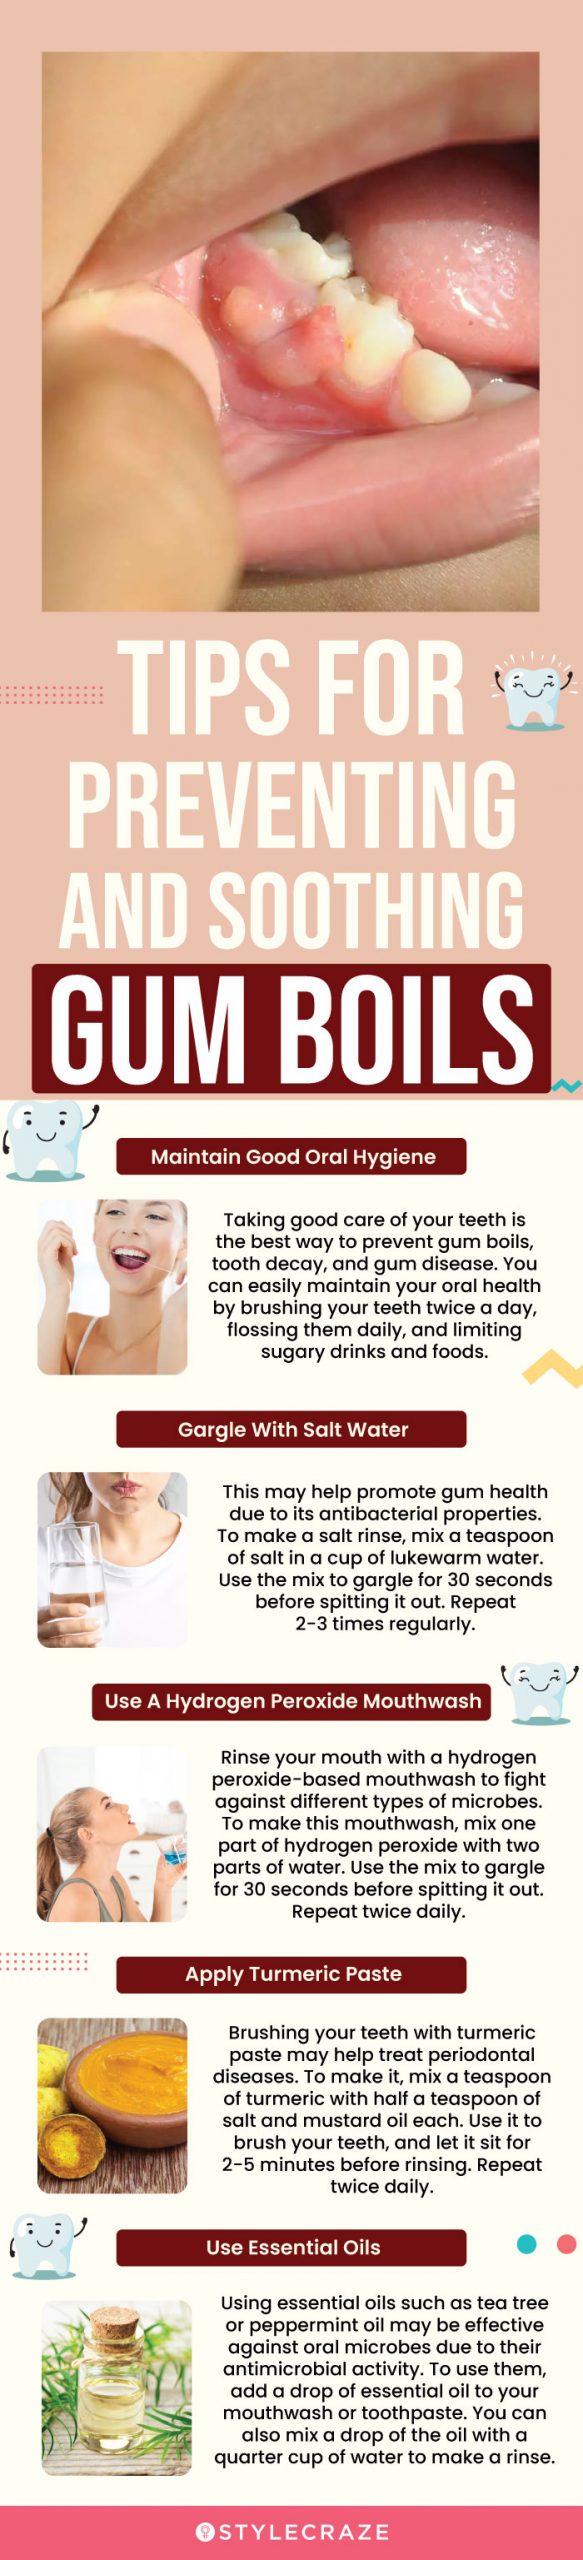 tips for preventing and soothing gum boil (infographic)